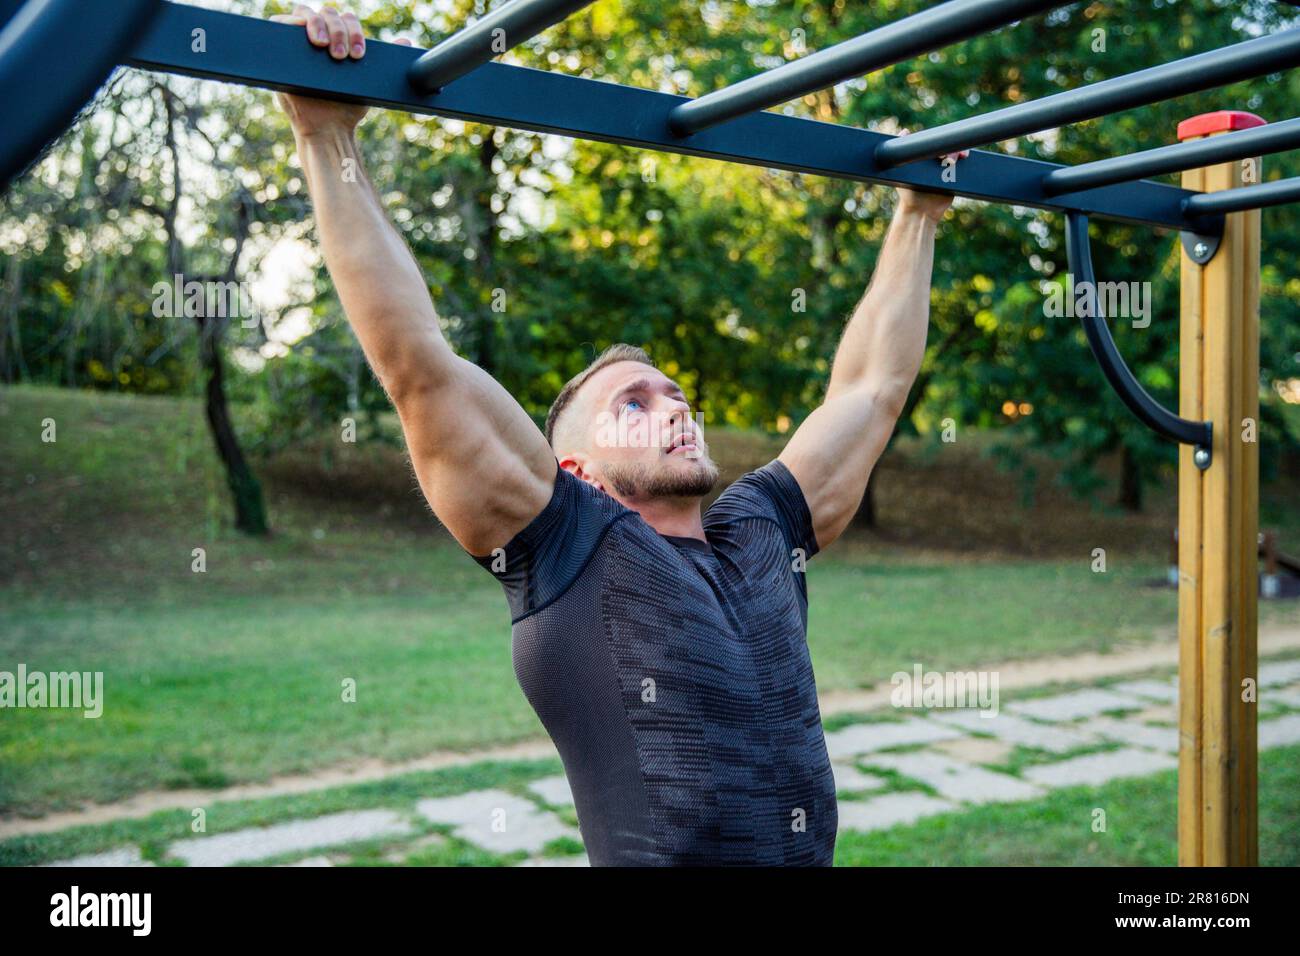 A fit man trains in an outdoor park with bars, outdoor workout Stock Photo